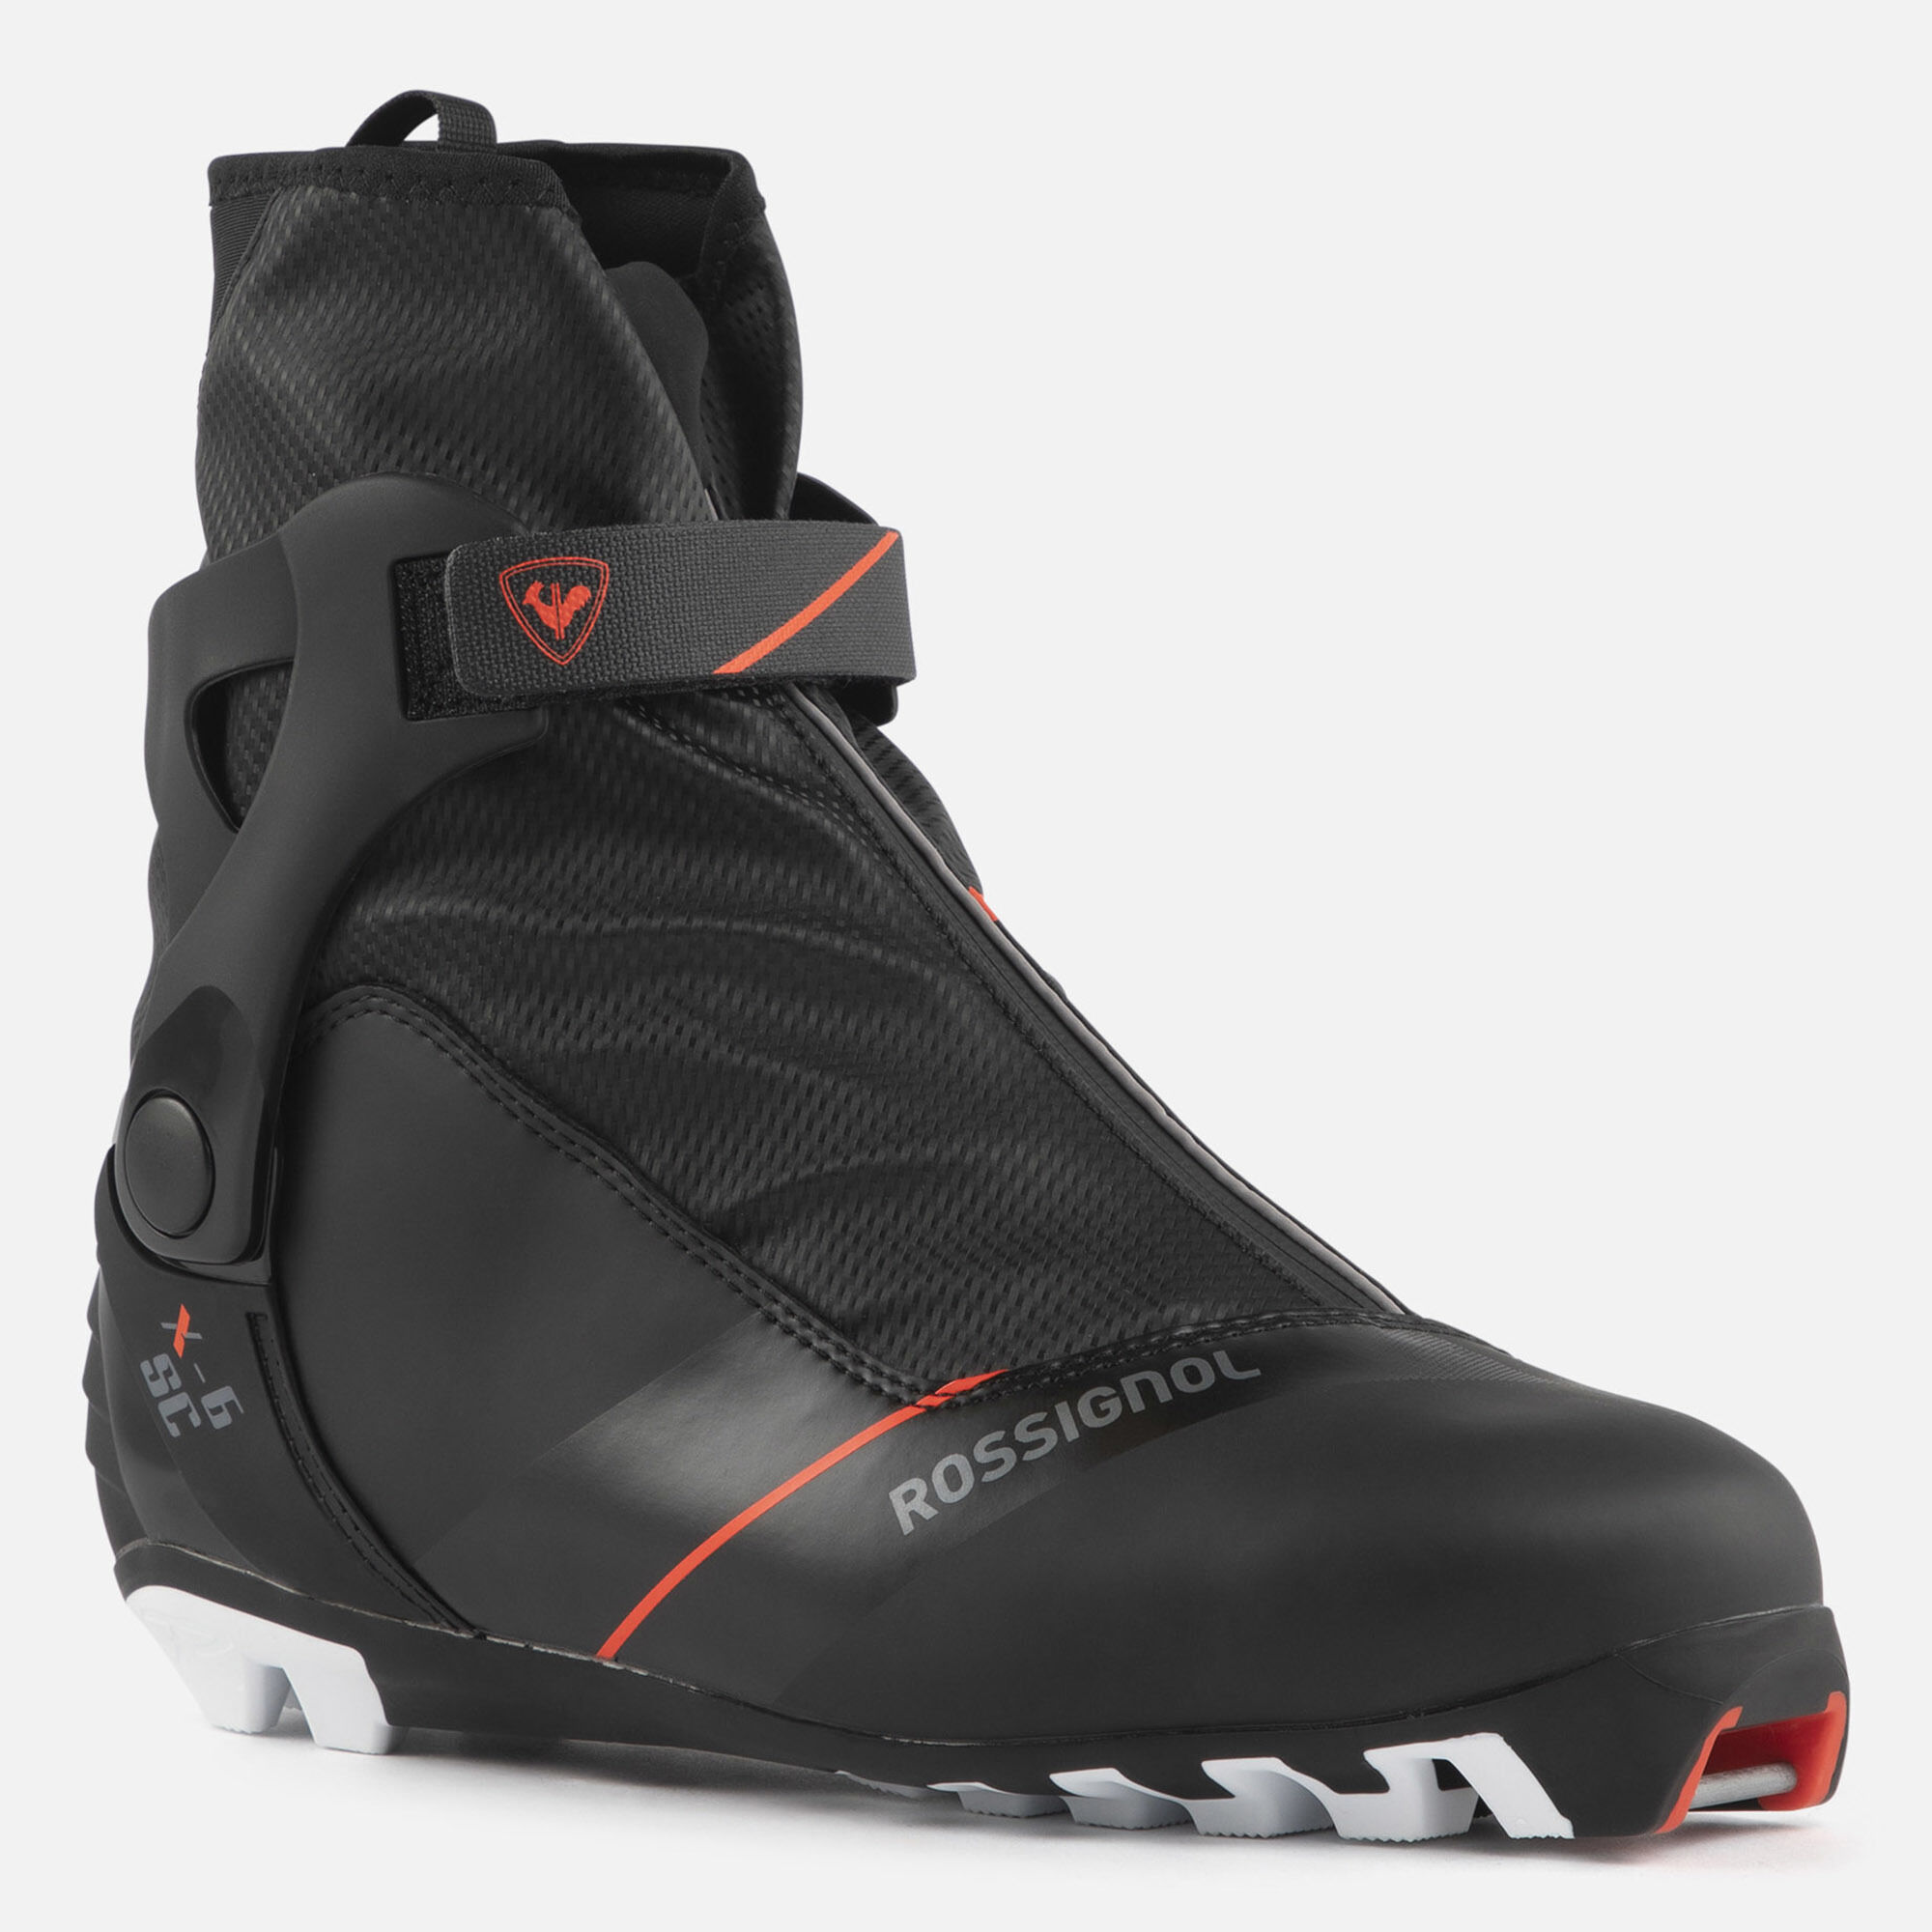 Unisex Race Skating And Classic Nordic Boots X-6 Sc | Skating